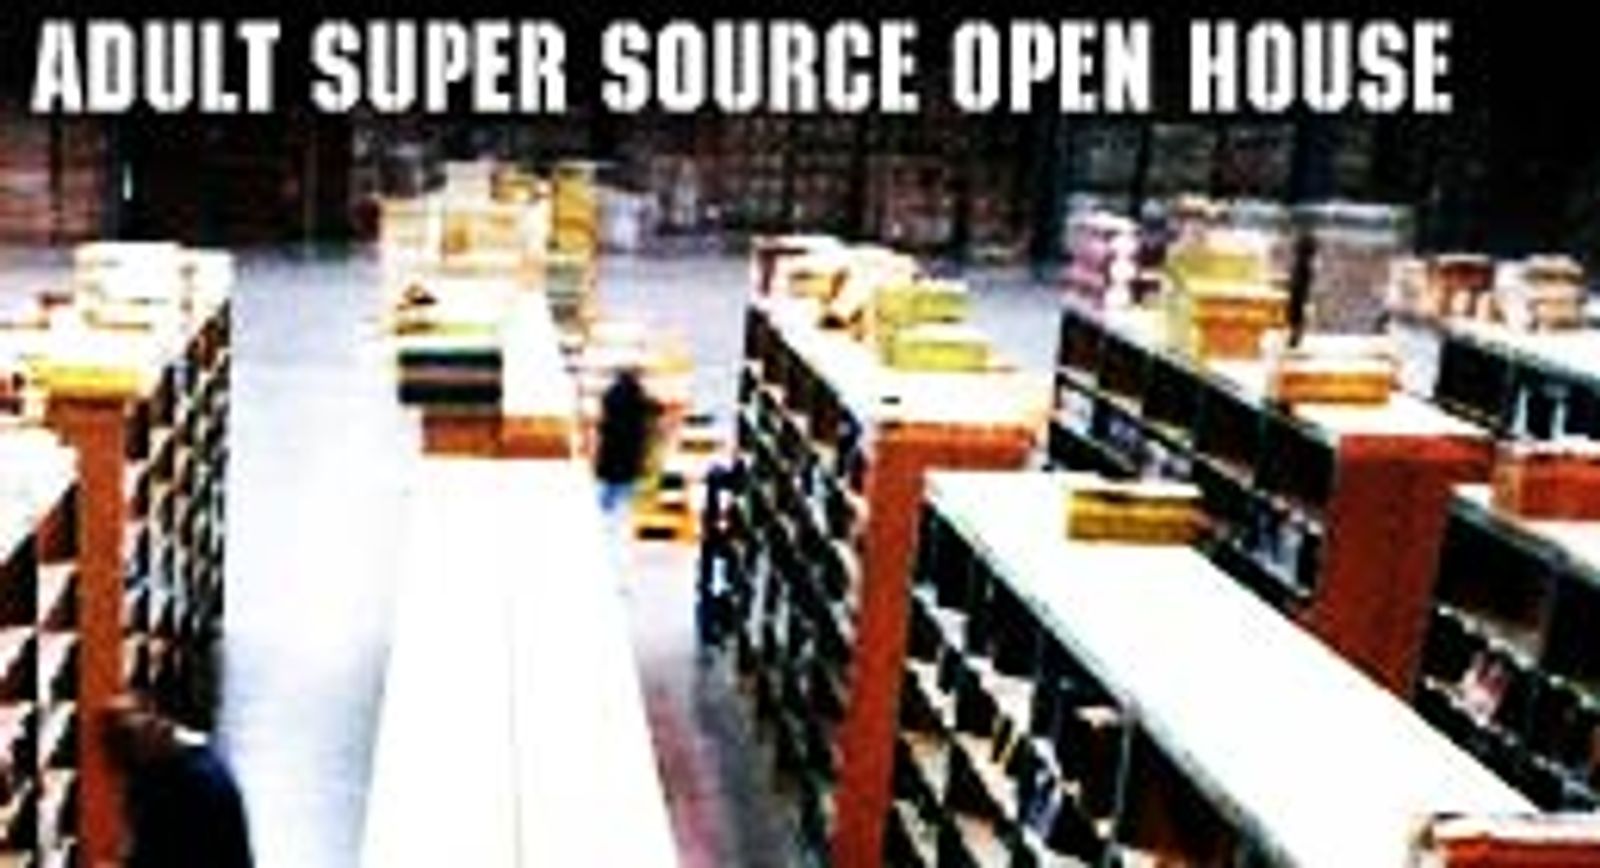 The Adult Super Source West Open House Plans Announced